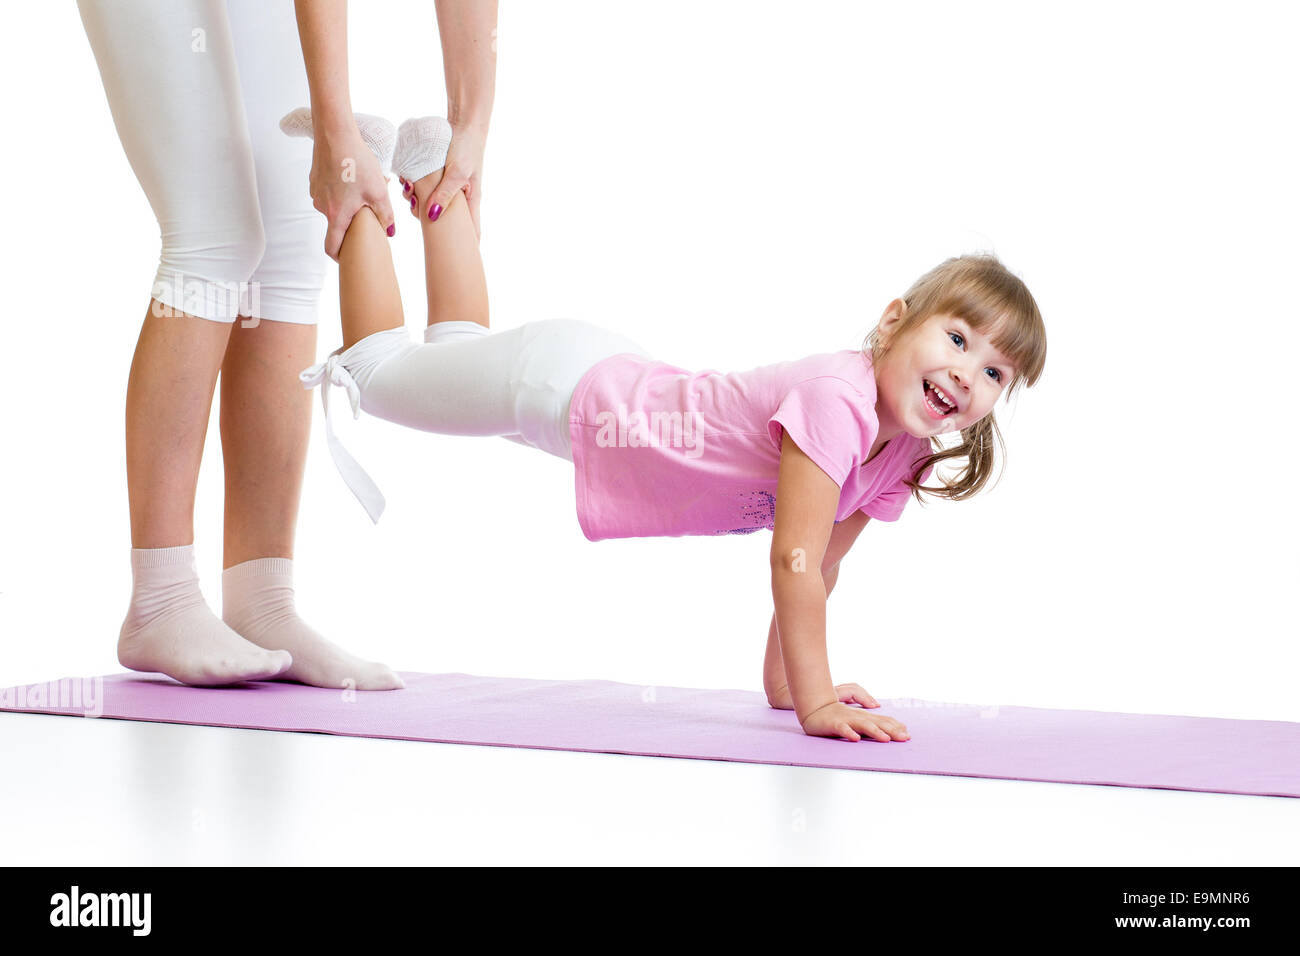 kid girl doing gymnastic and standing on her hands Stock Photo